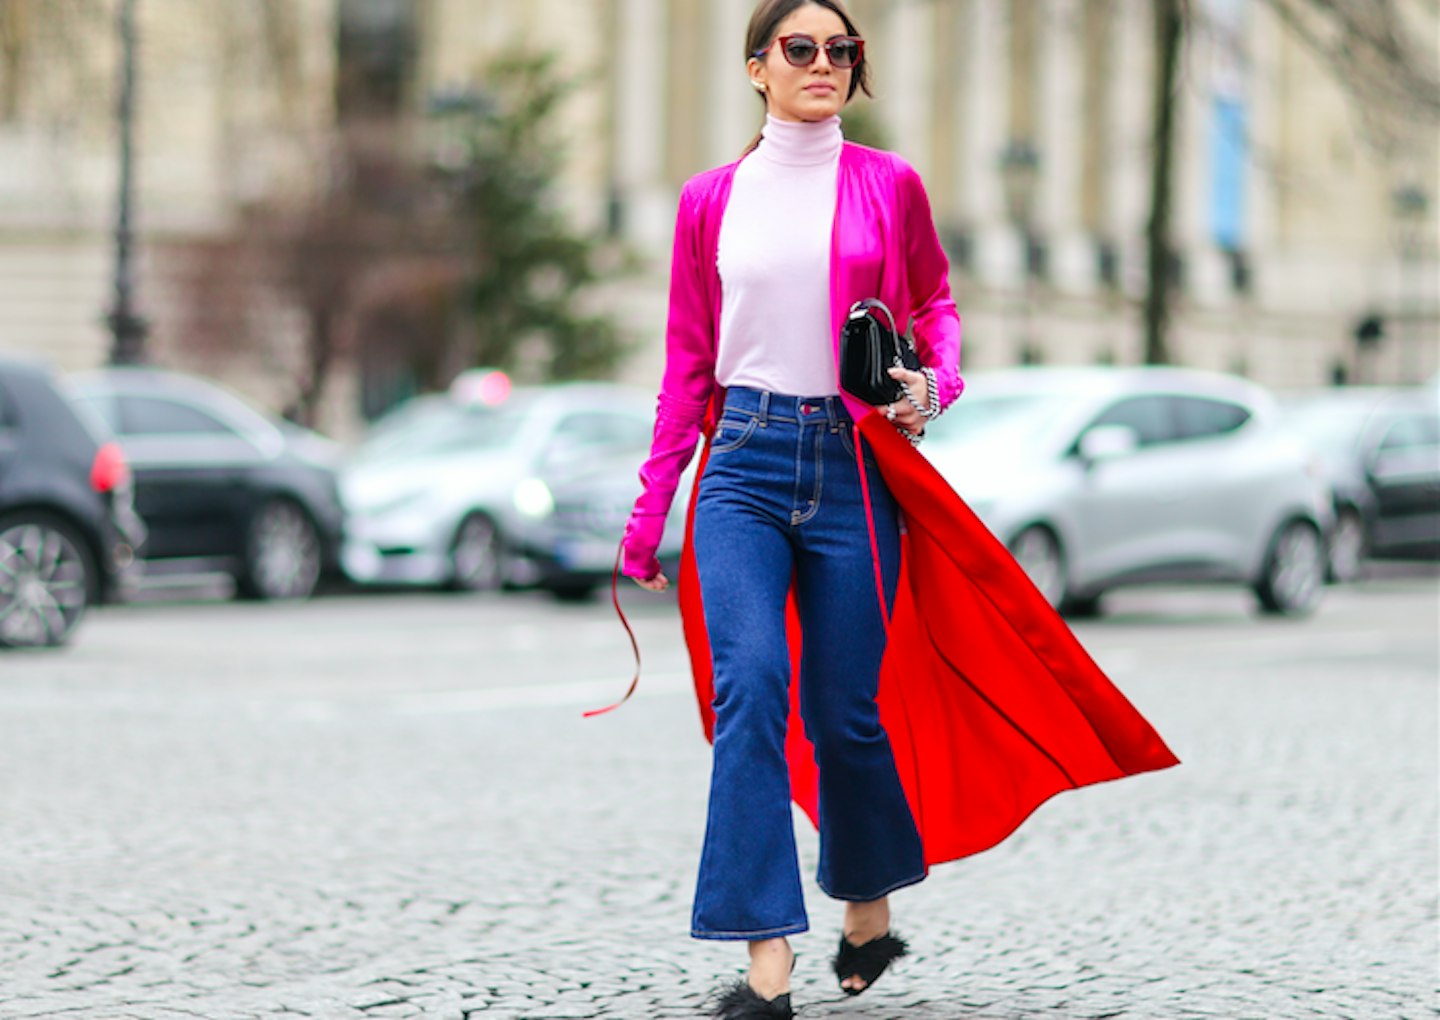 The Denim Trends We're Indulging In This Summer  Denim trends, Fashion,  Daily fashion inspiration